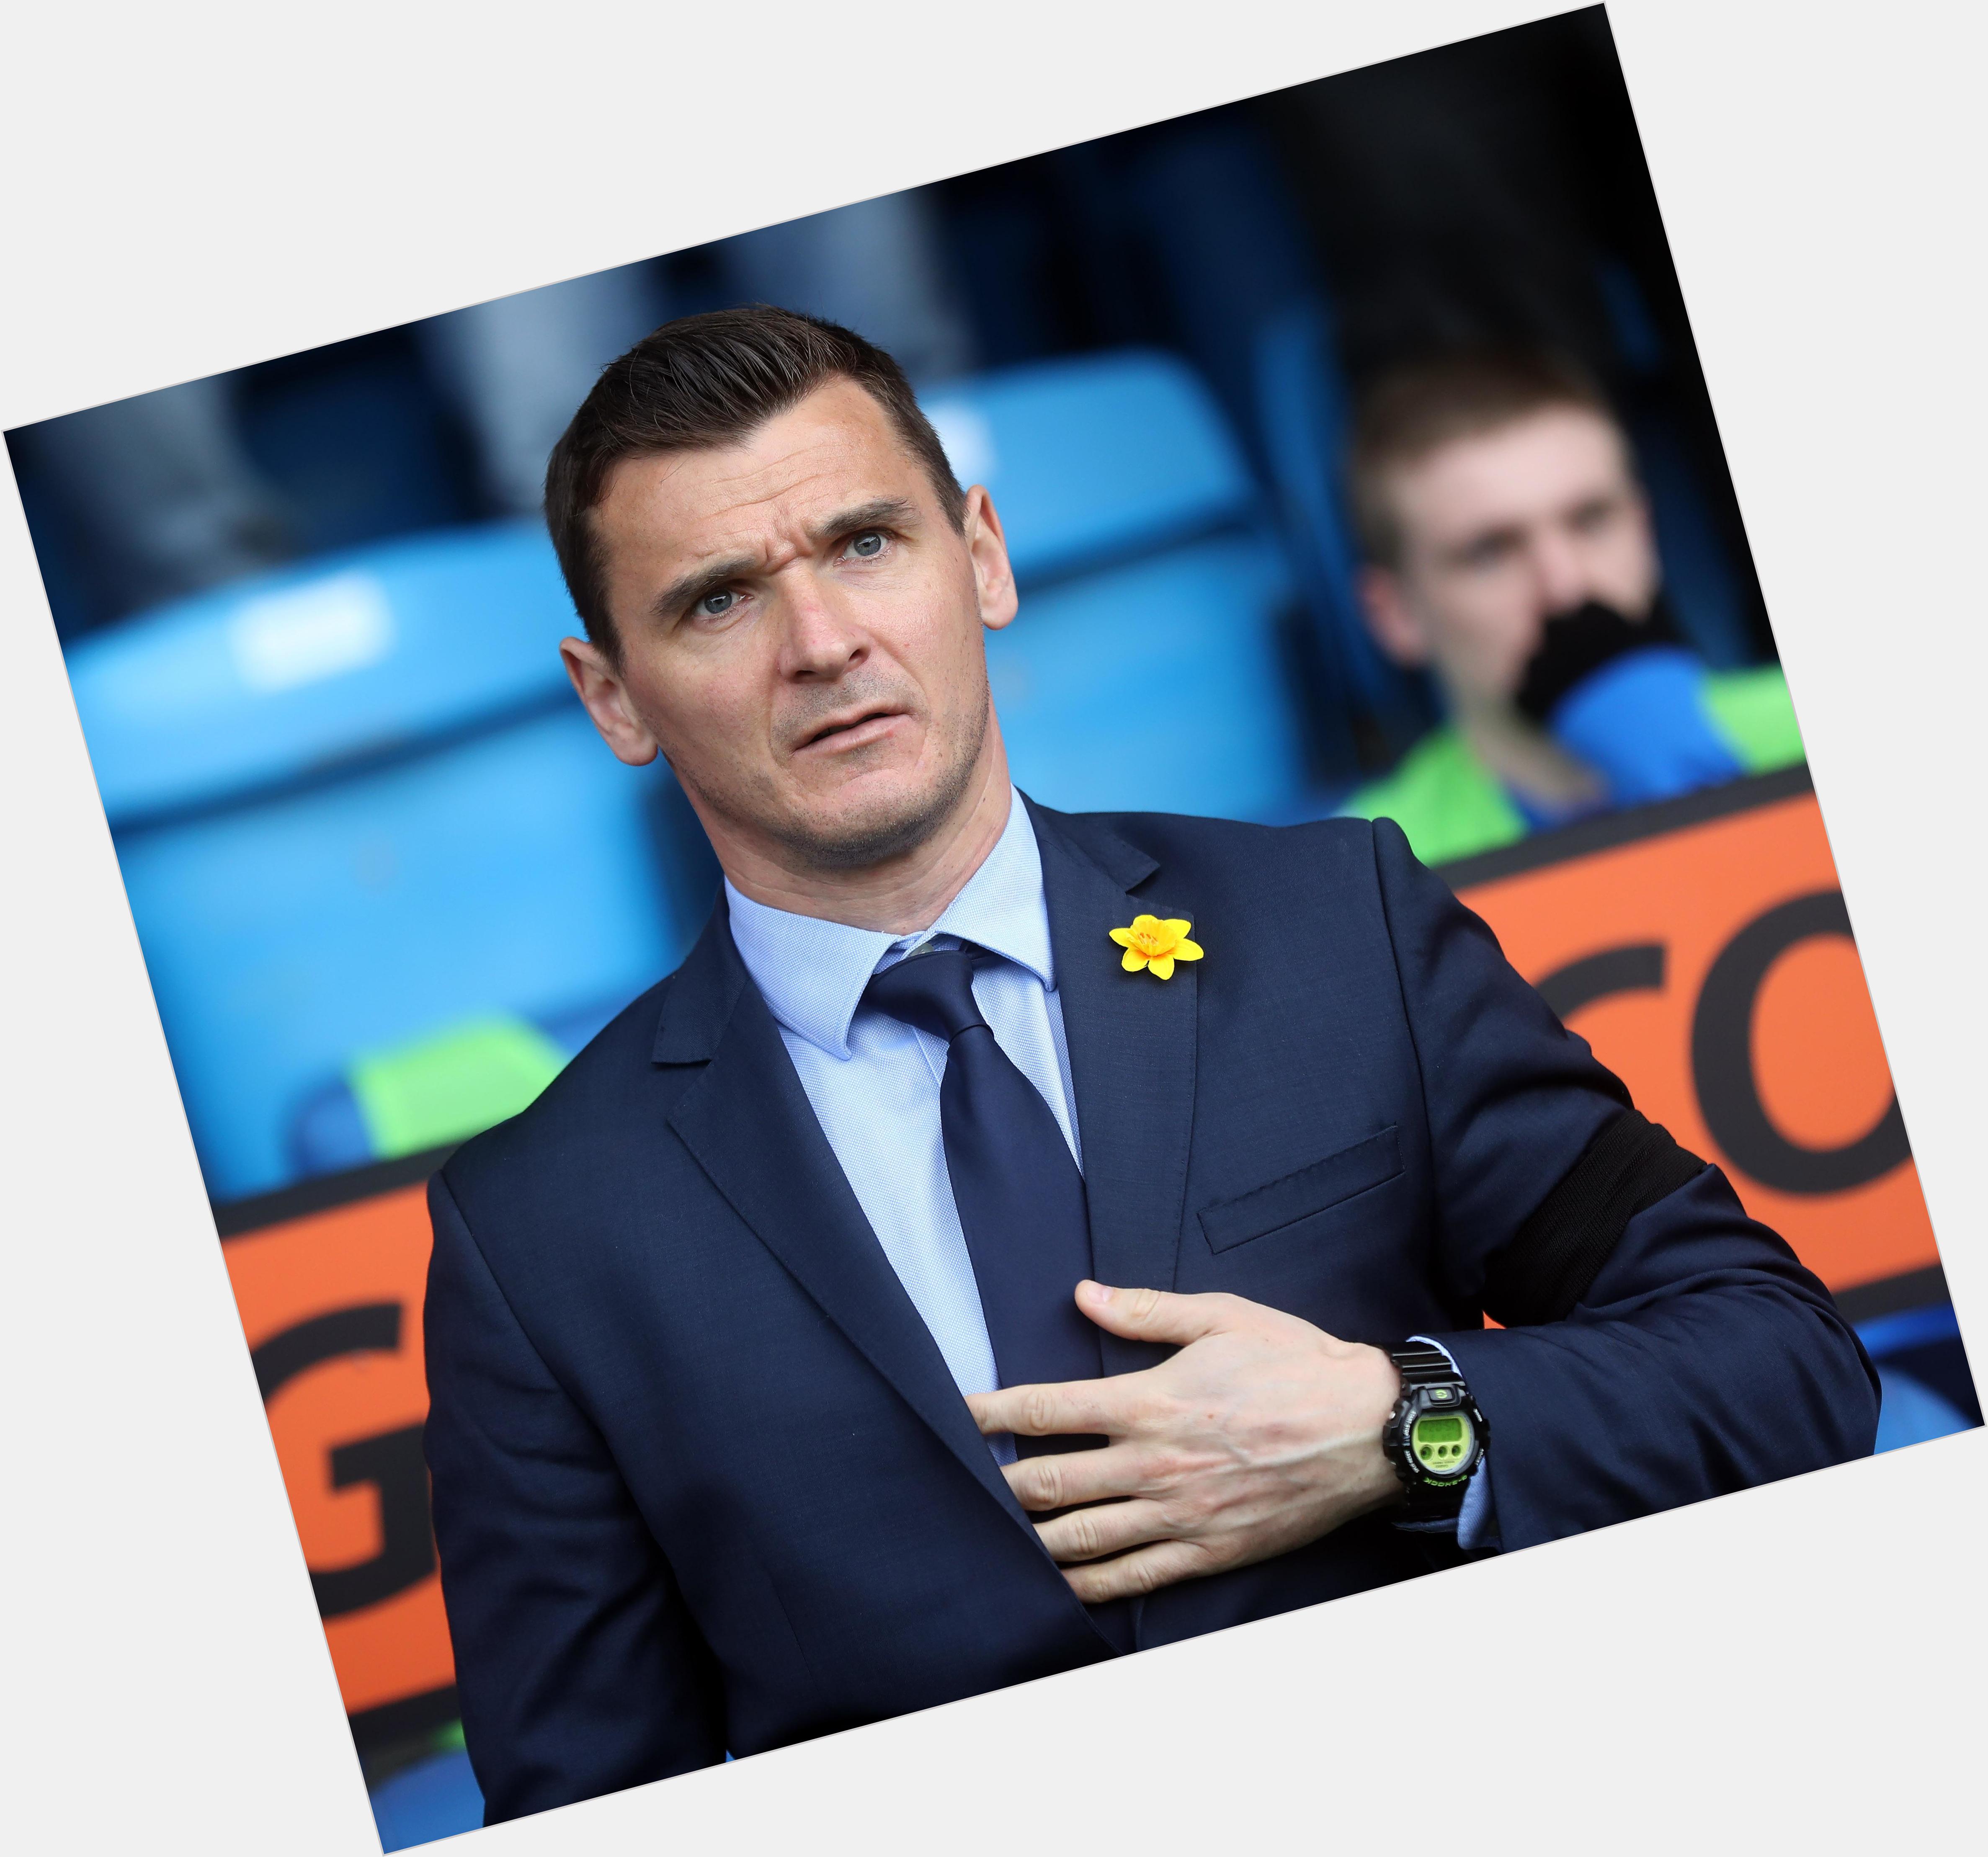 Http://fanpagepress.net/m/L/Lee Mcculloch New Pic 1